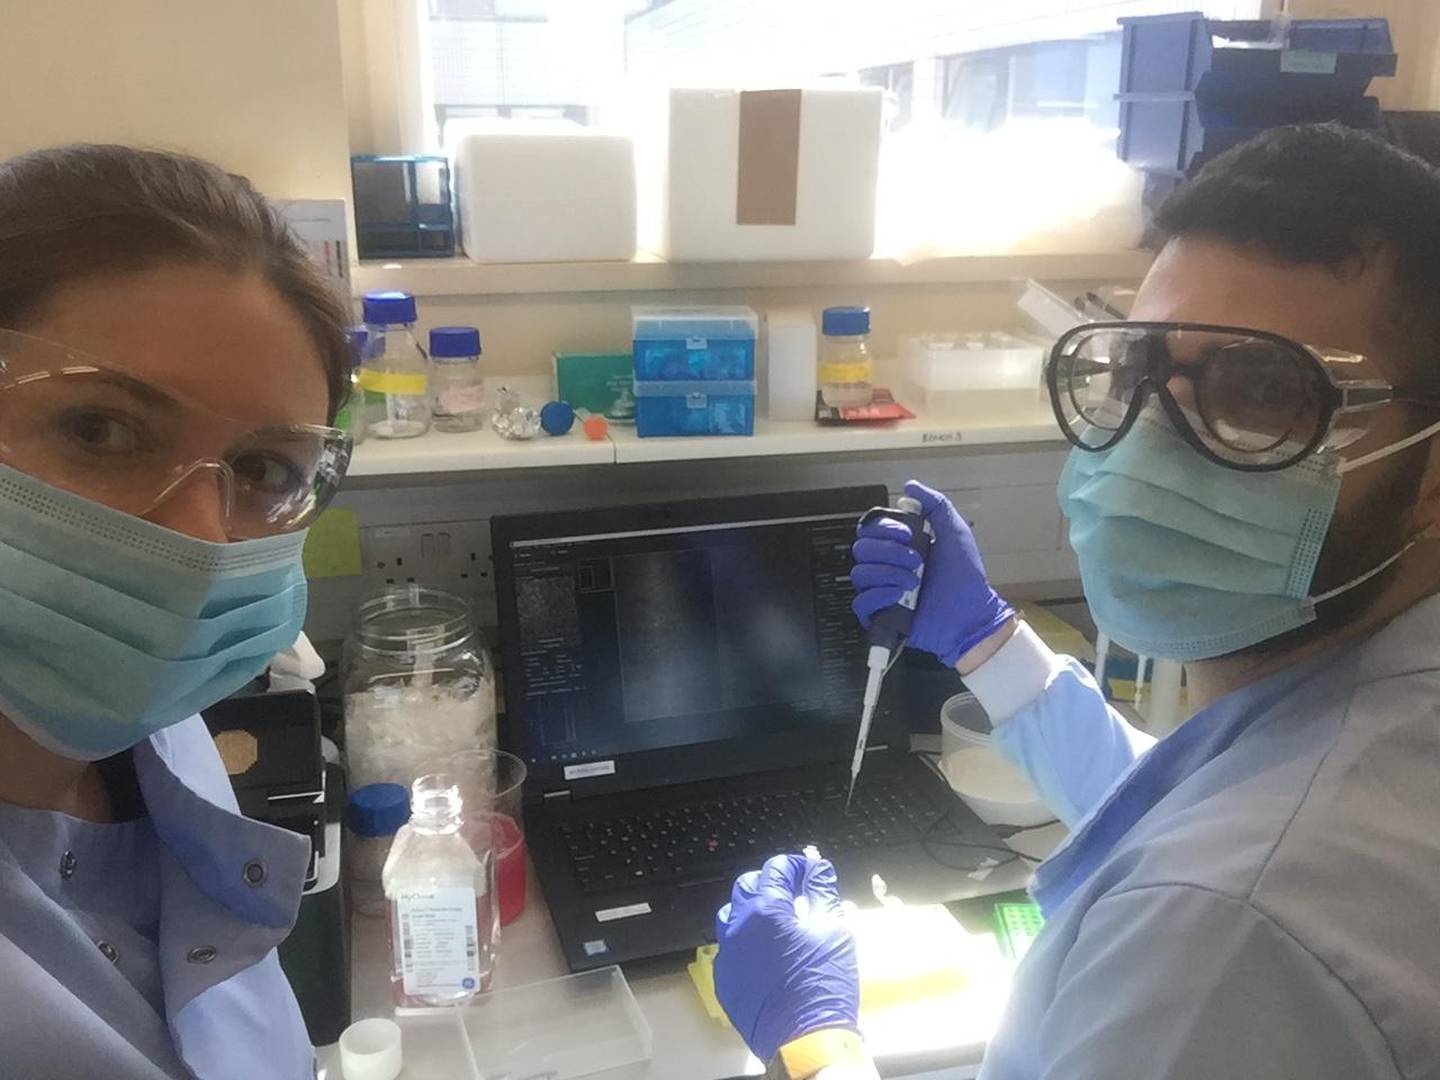 Oxford scientists analysing Covid-19 samples at the John Radcliffe Hospital, UK. Oxford University